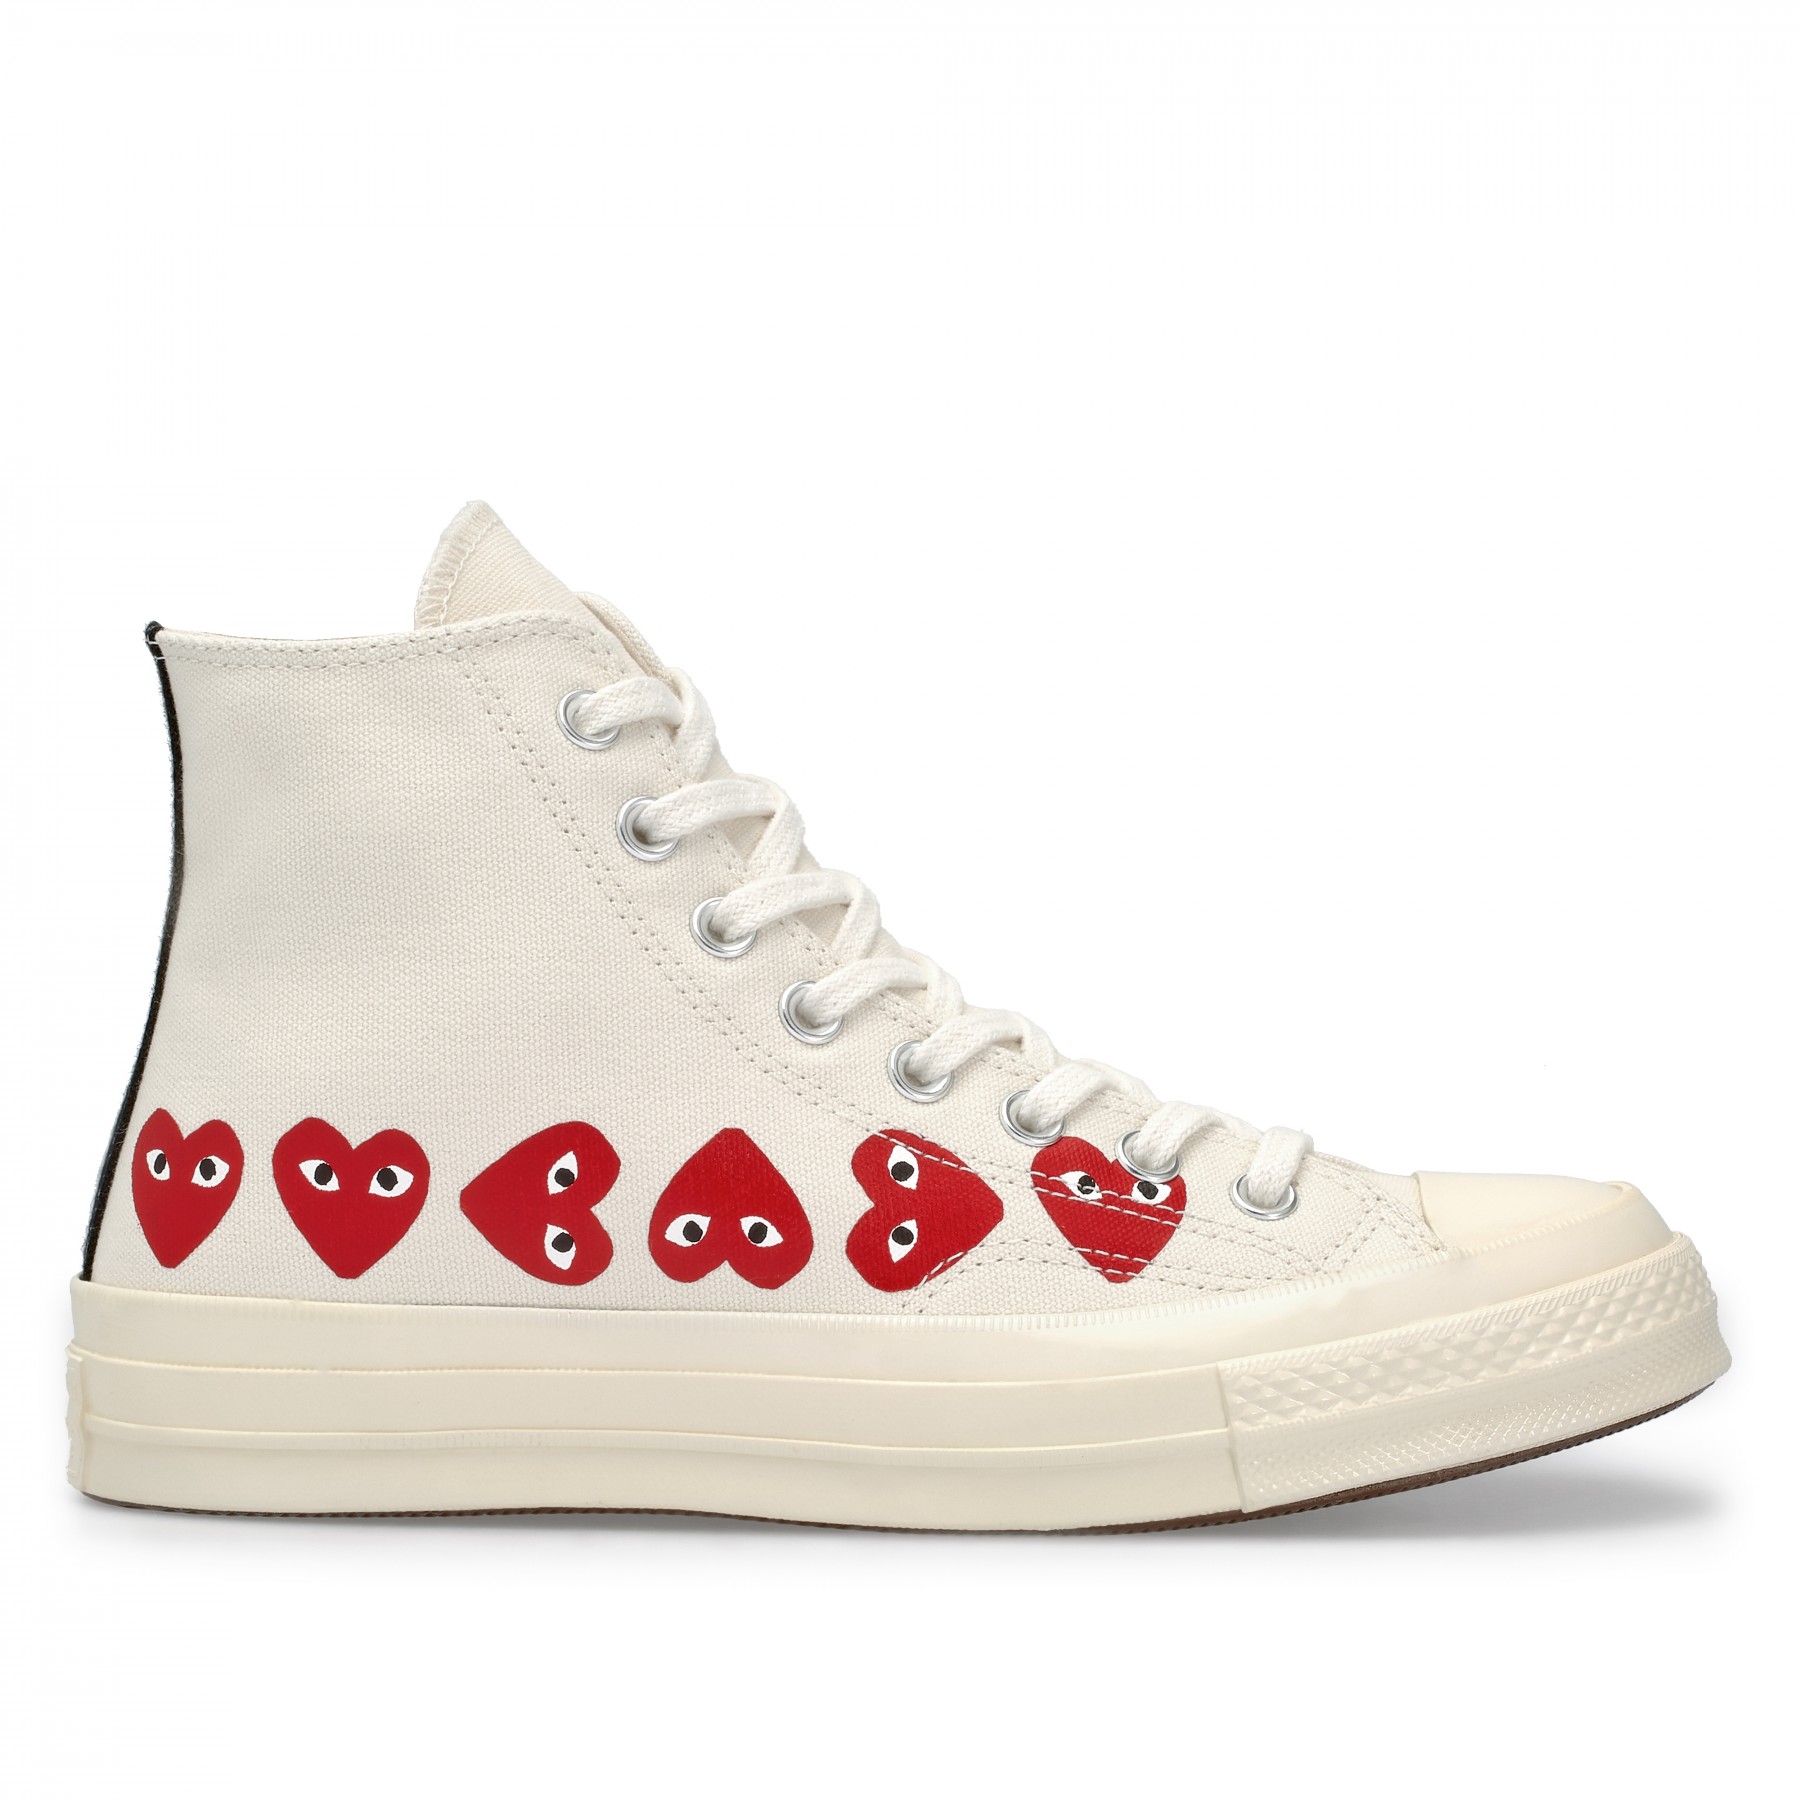 black and white converse with red heart